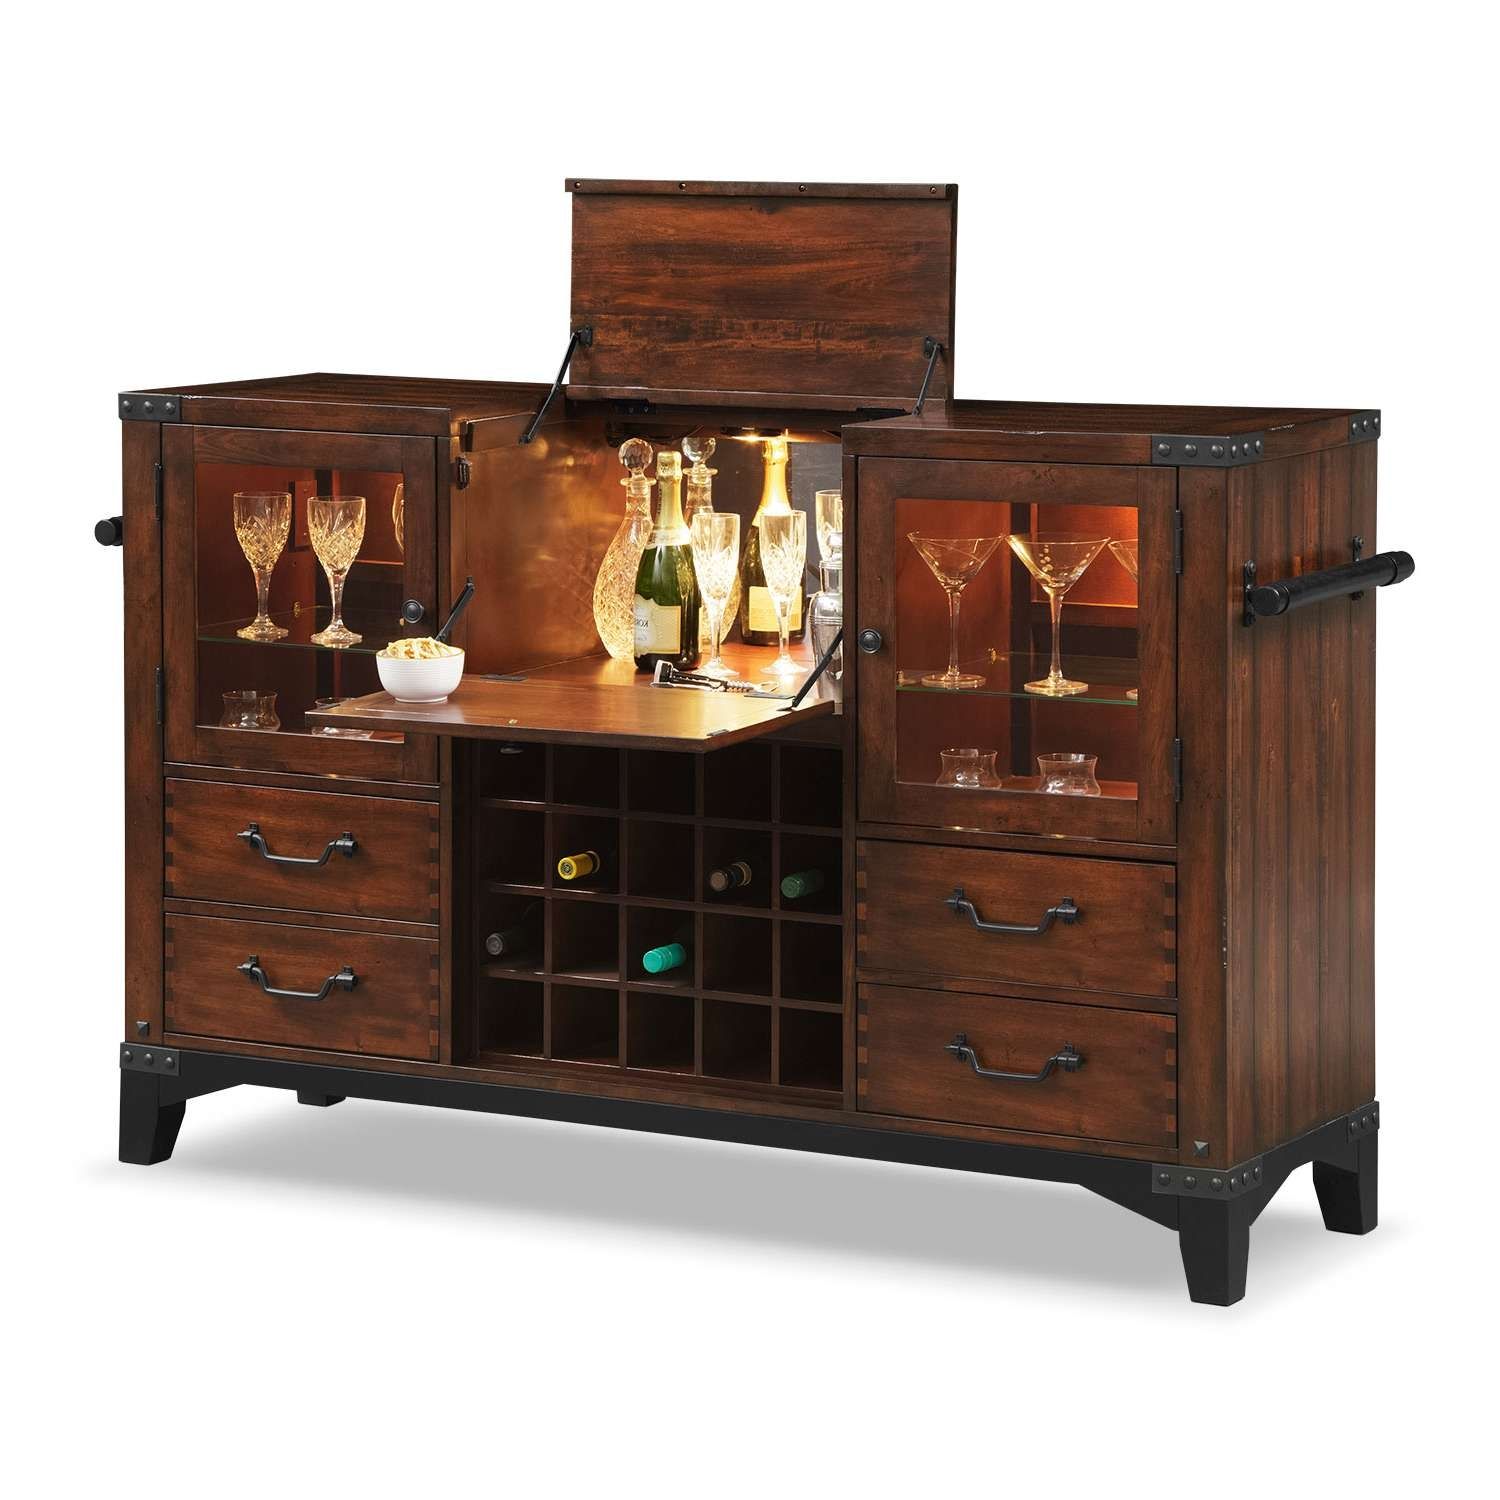 Newcastle Sideboard – Mahogany | American Signature Furniture Throughout Silver Sideboards (View 13 of 20)